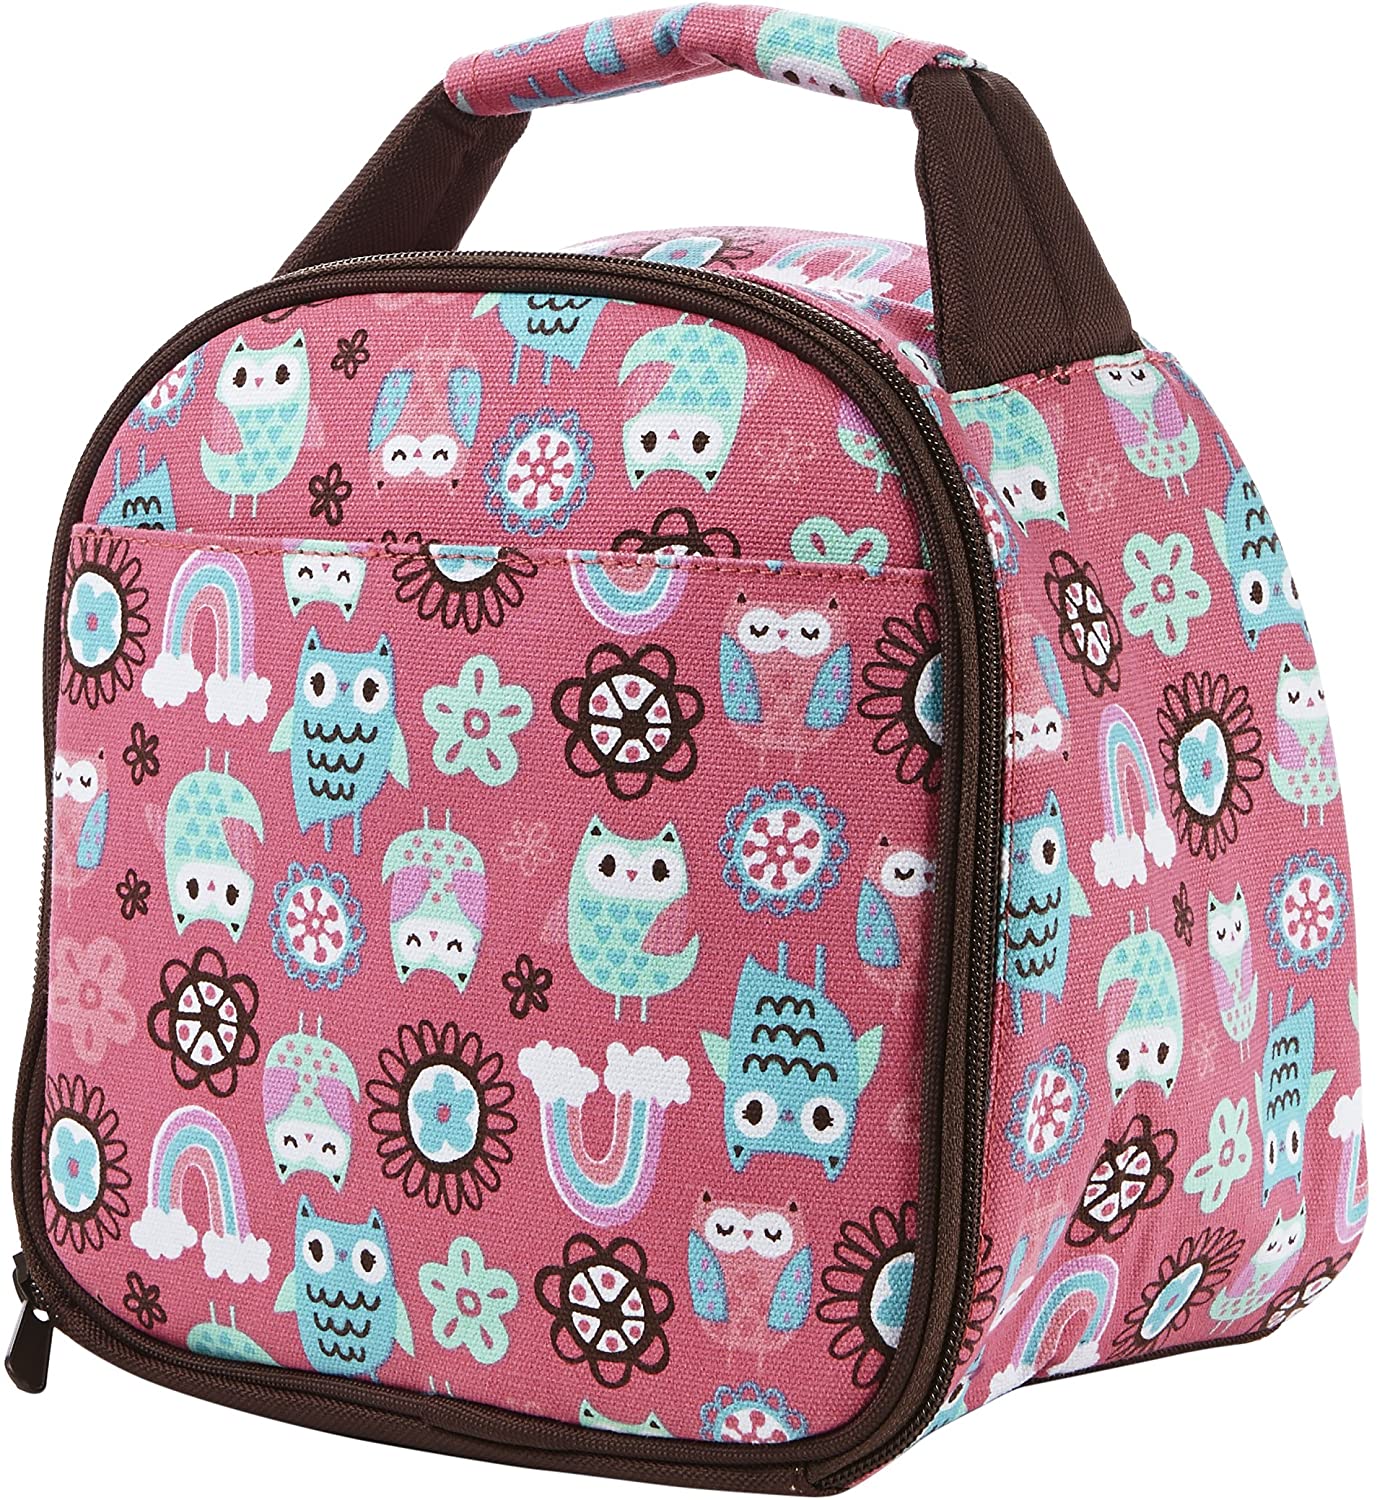 Fit & Fresh Gabby Insulated Lunch Bag w/ Zipper (Rainbow Owl) $5.10 + Free Shipping w/ Amazon Prime or Orders $25+